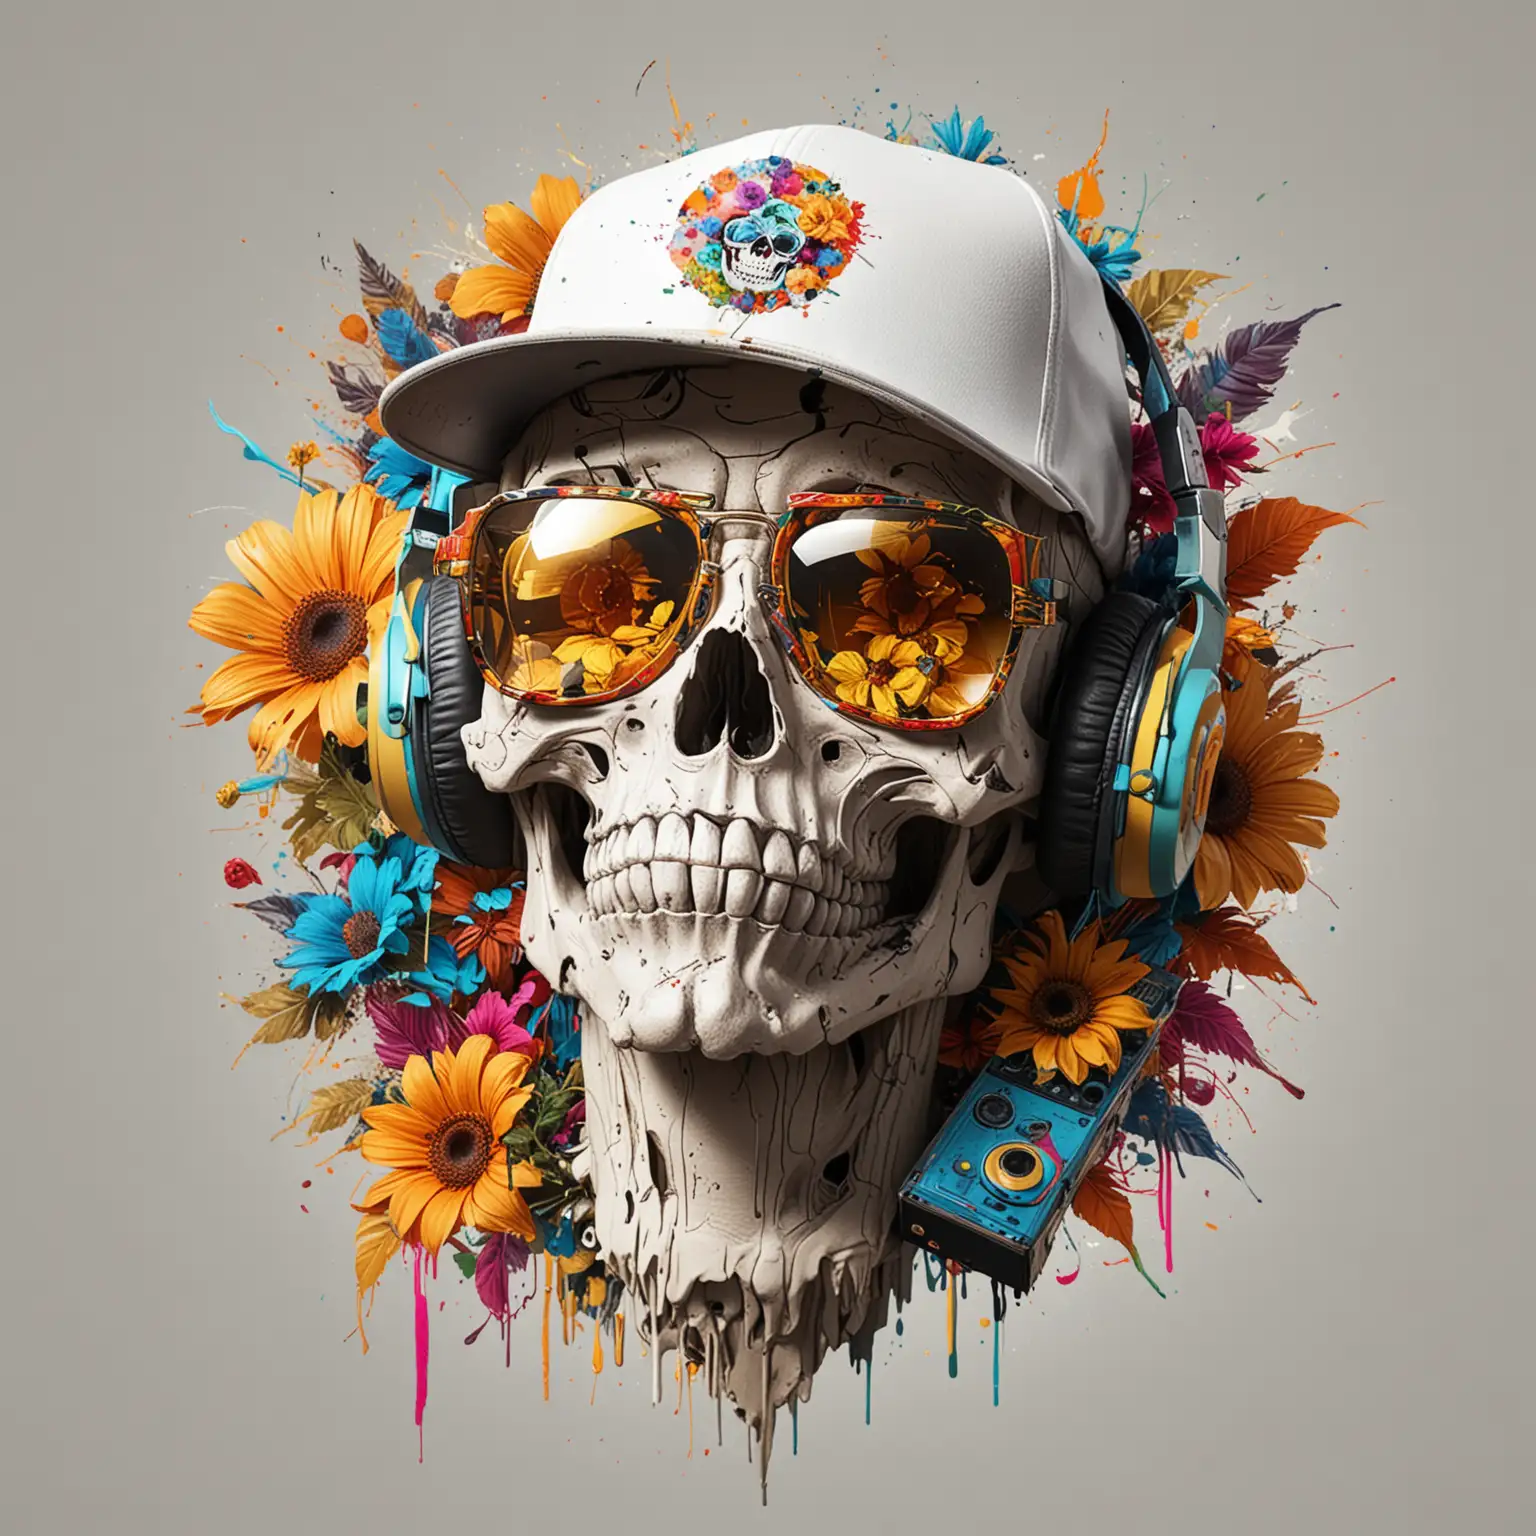 Colorful Abstract Hip Hop Skull Listening to Music with Graffiti Cartoon Style